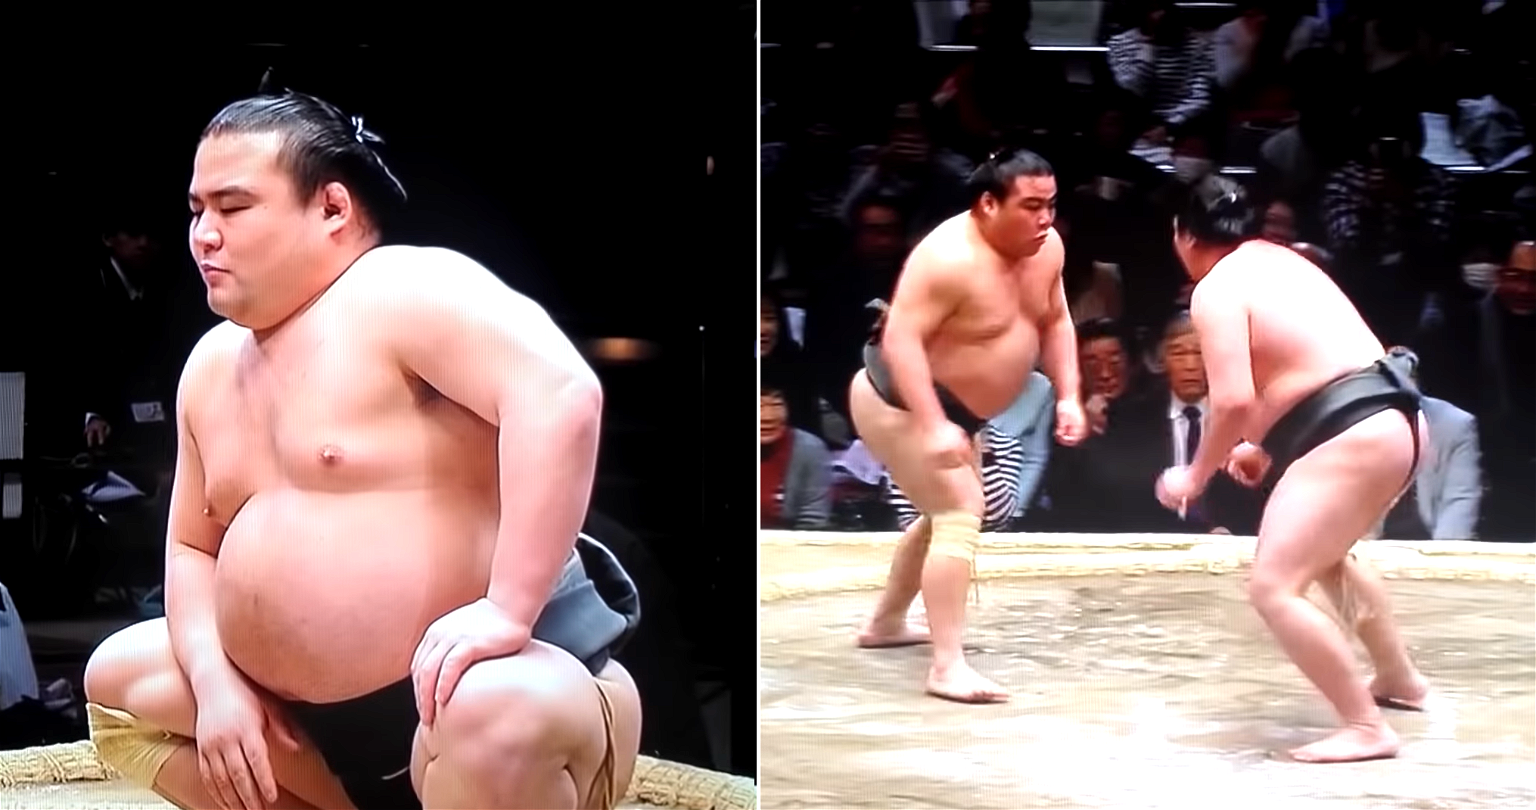 Sumo Wrestler Becomes One of Japan’s Youngest COVID-19 Deaths at 28